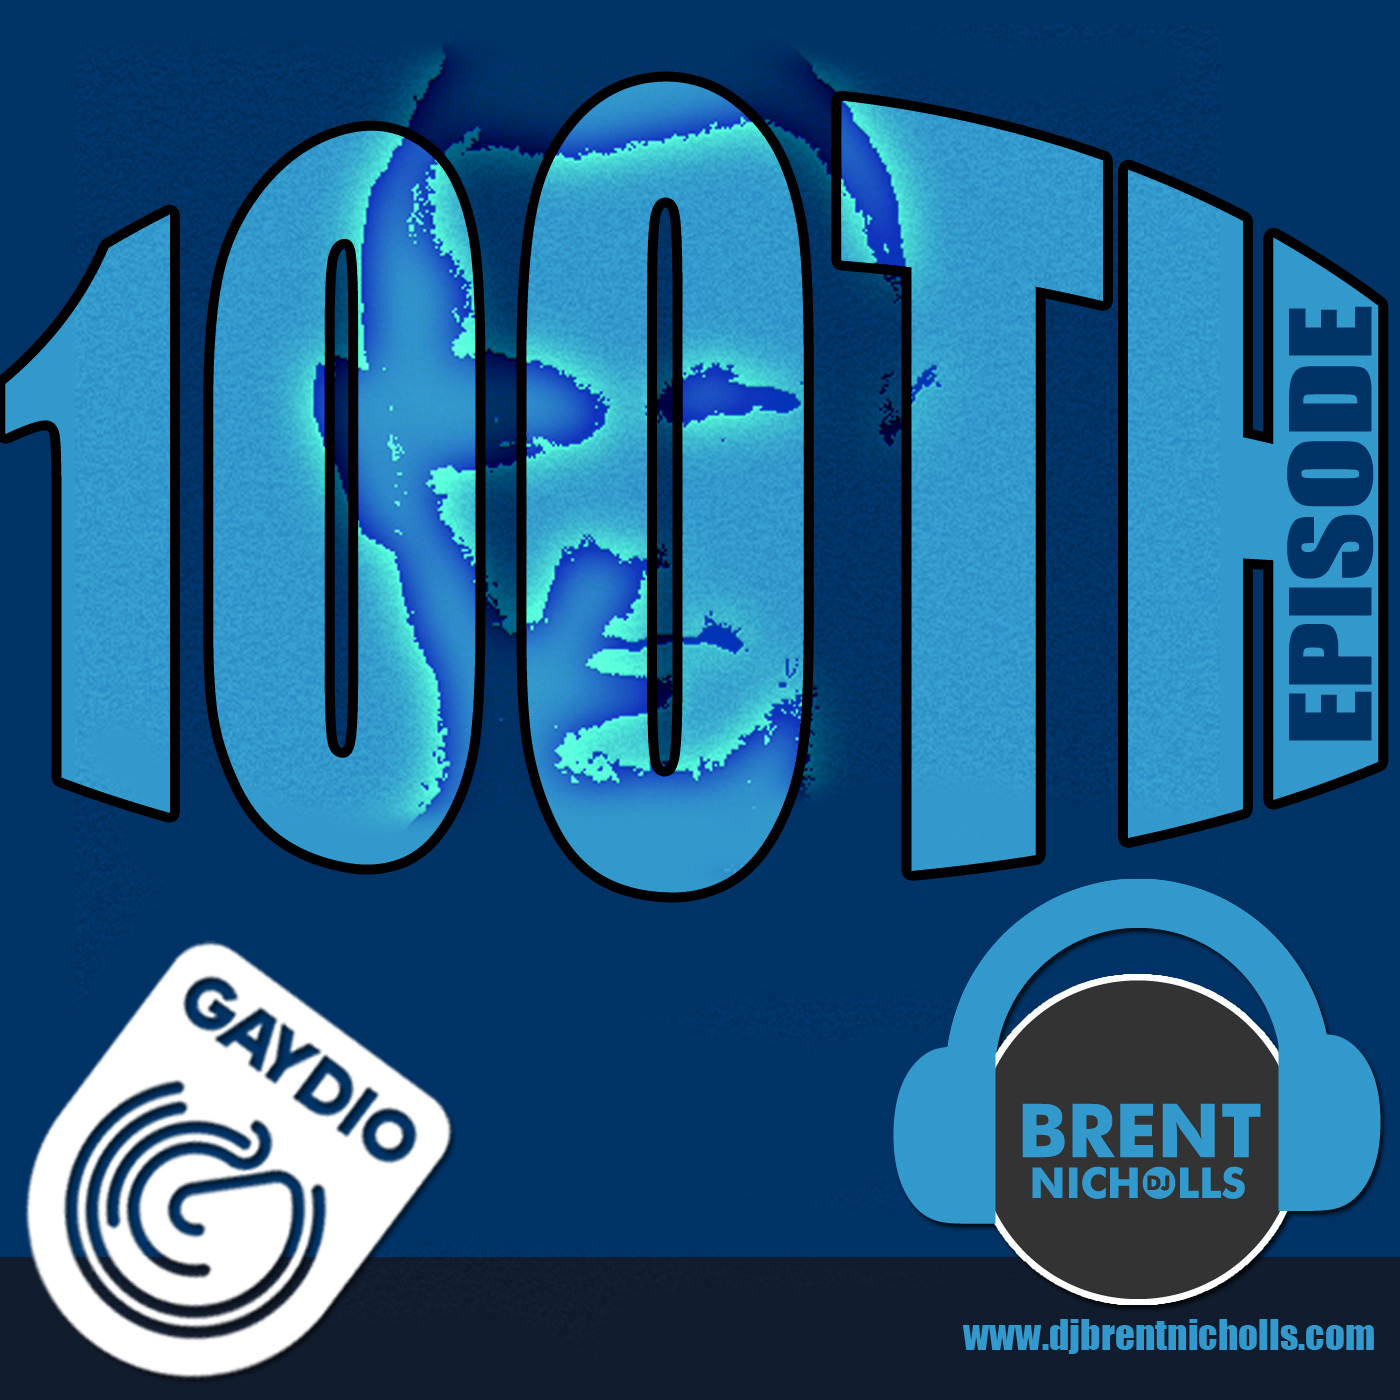 PODCAST: GAYDIO 100TH EPISODE